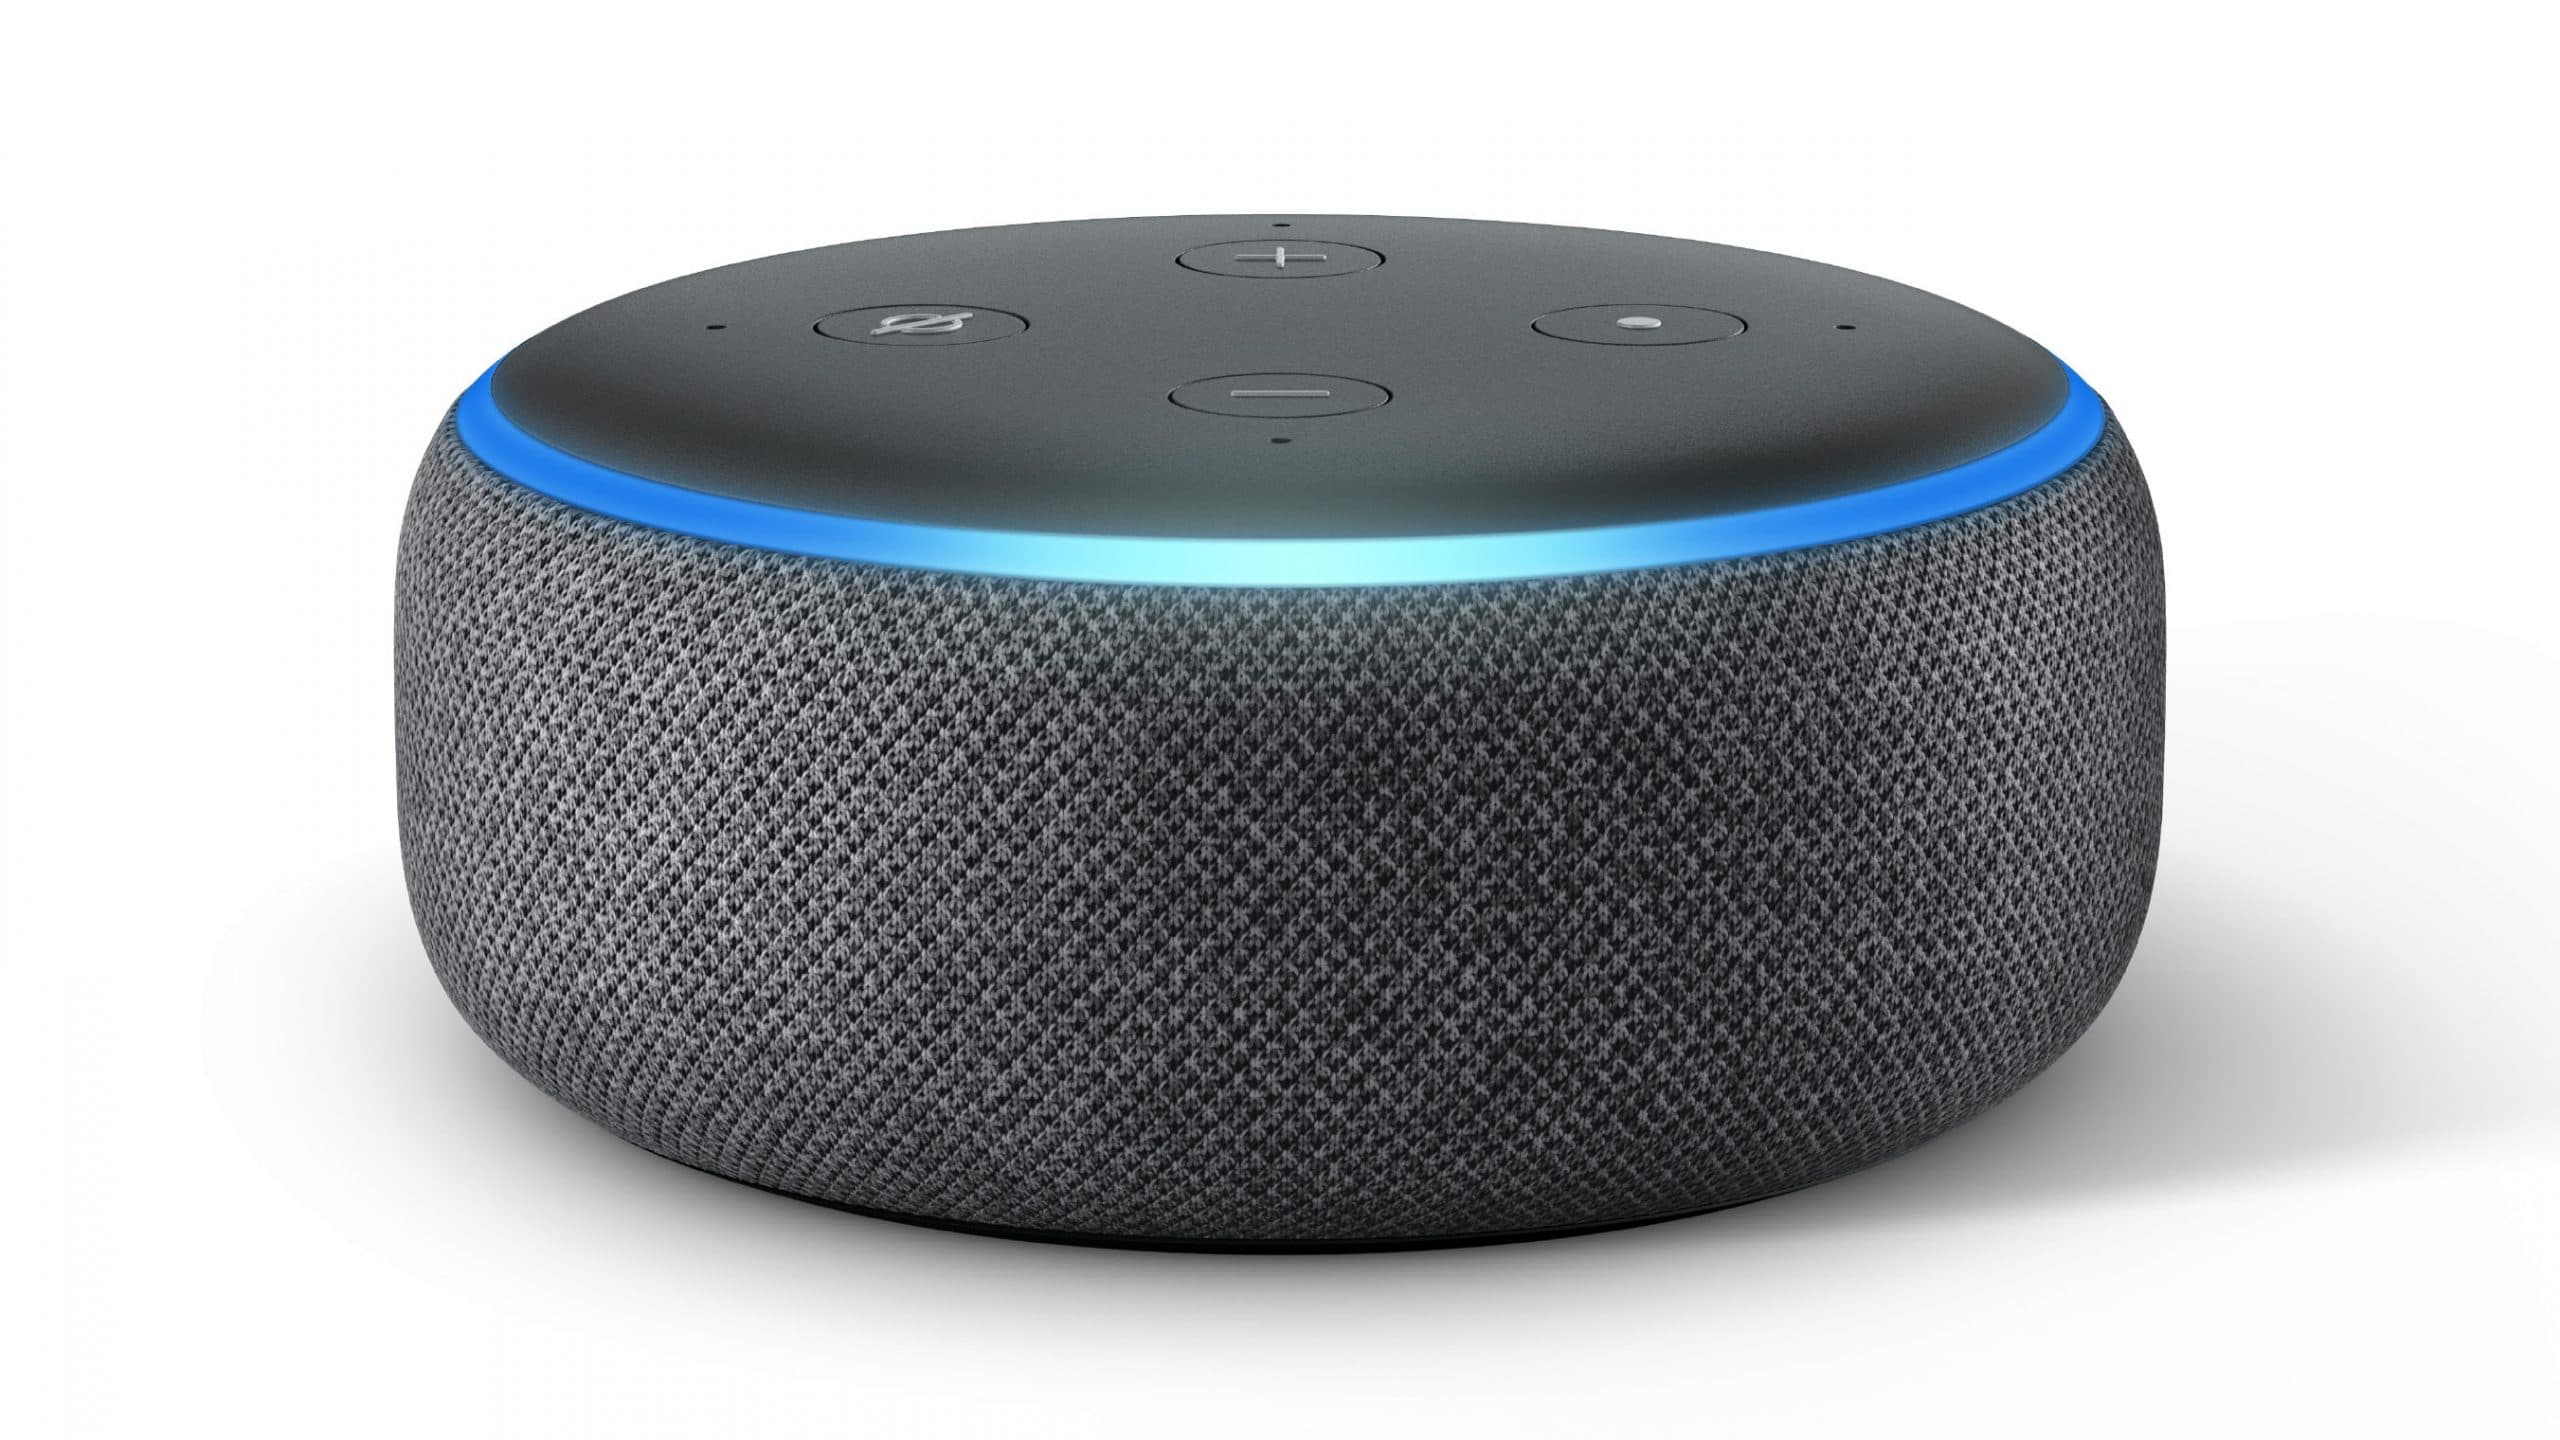 A close up of the Amazon Alexa Echo Dot 3 in a black colour with a blue ring of light on the top.